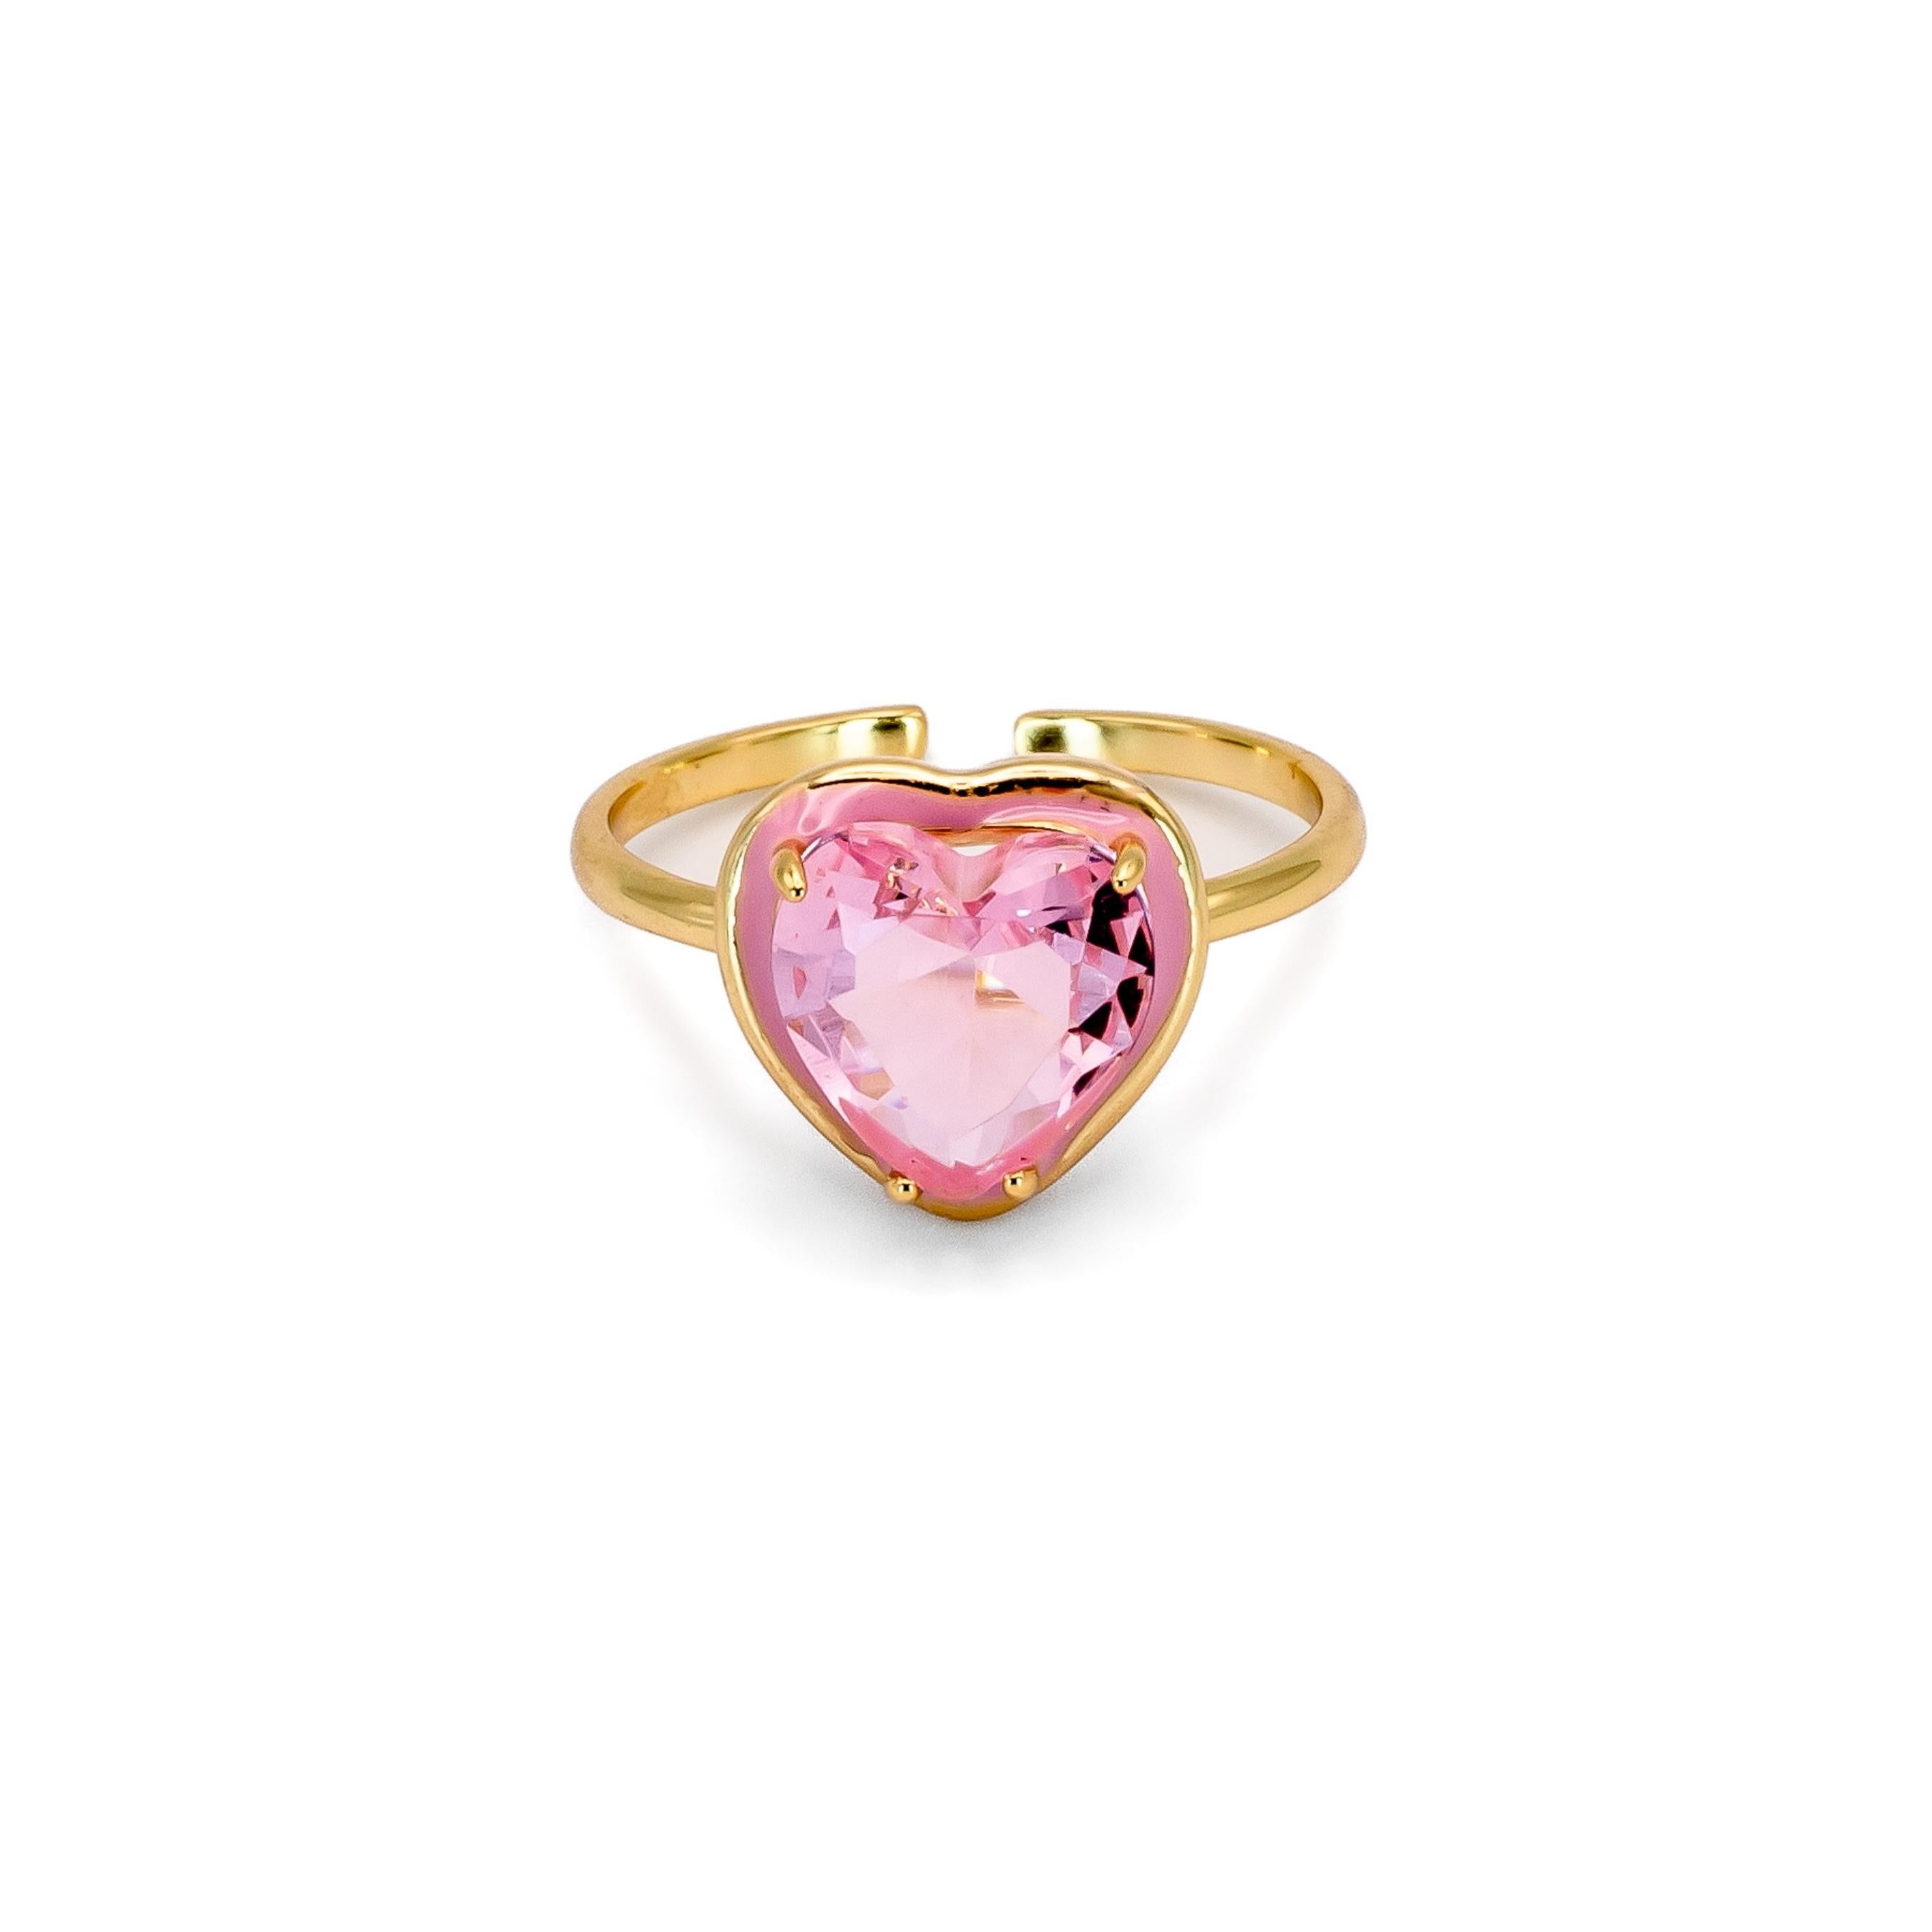 Sweetheart Adjustable Ring in Pink